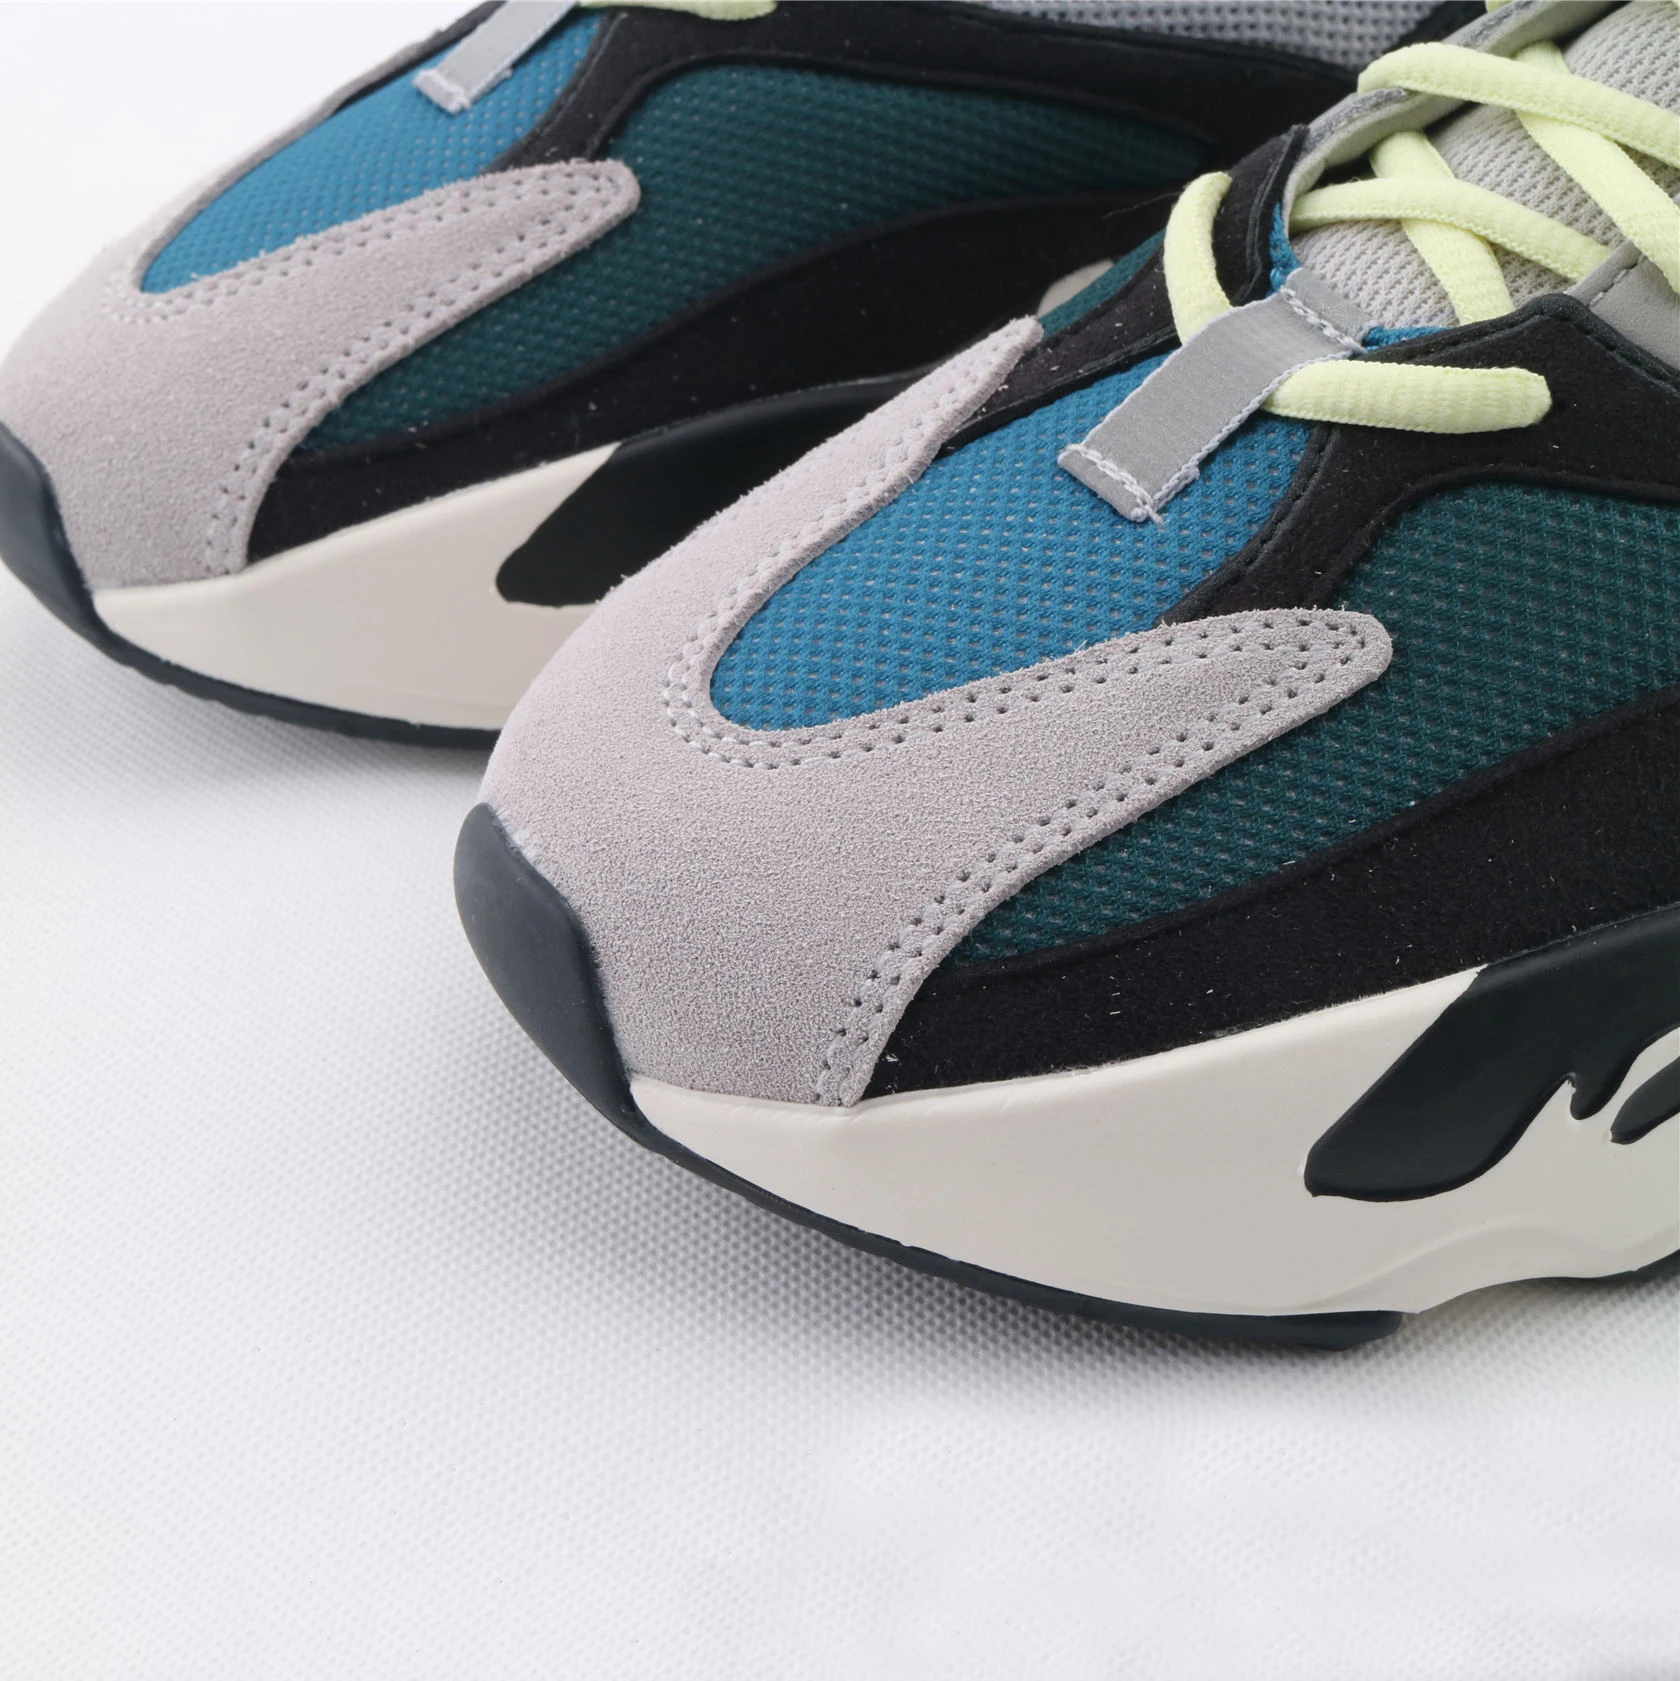 Original Yeezy Azael 700 V3 Running Shoes Casual Sport Shoes Sneakers ...